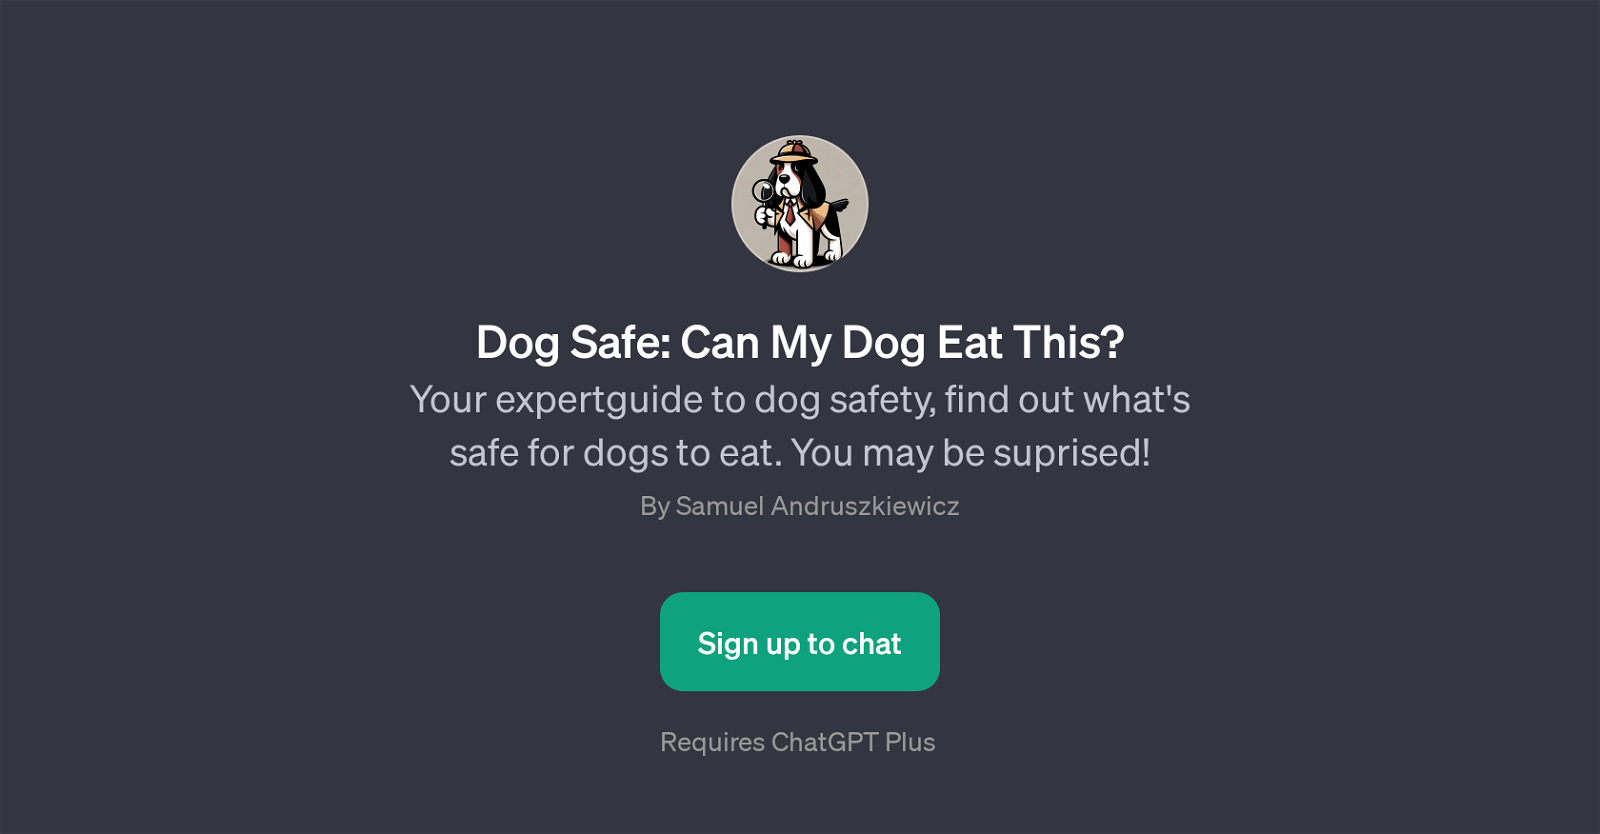 Dog Safe: Can My Dog Eat This? website